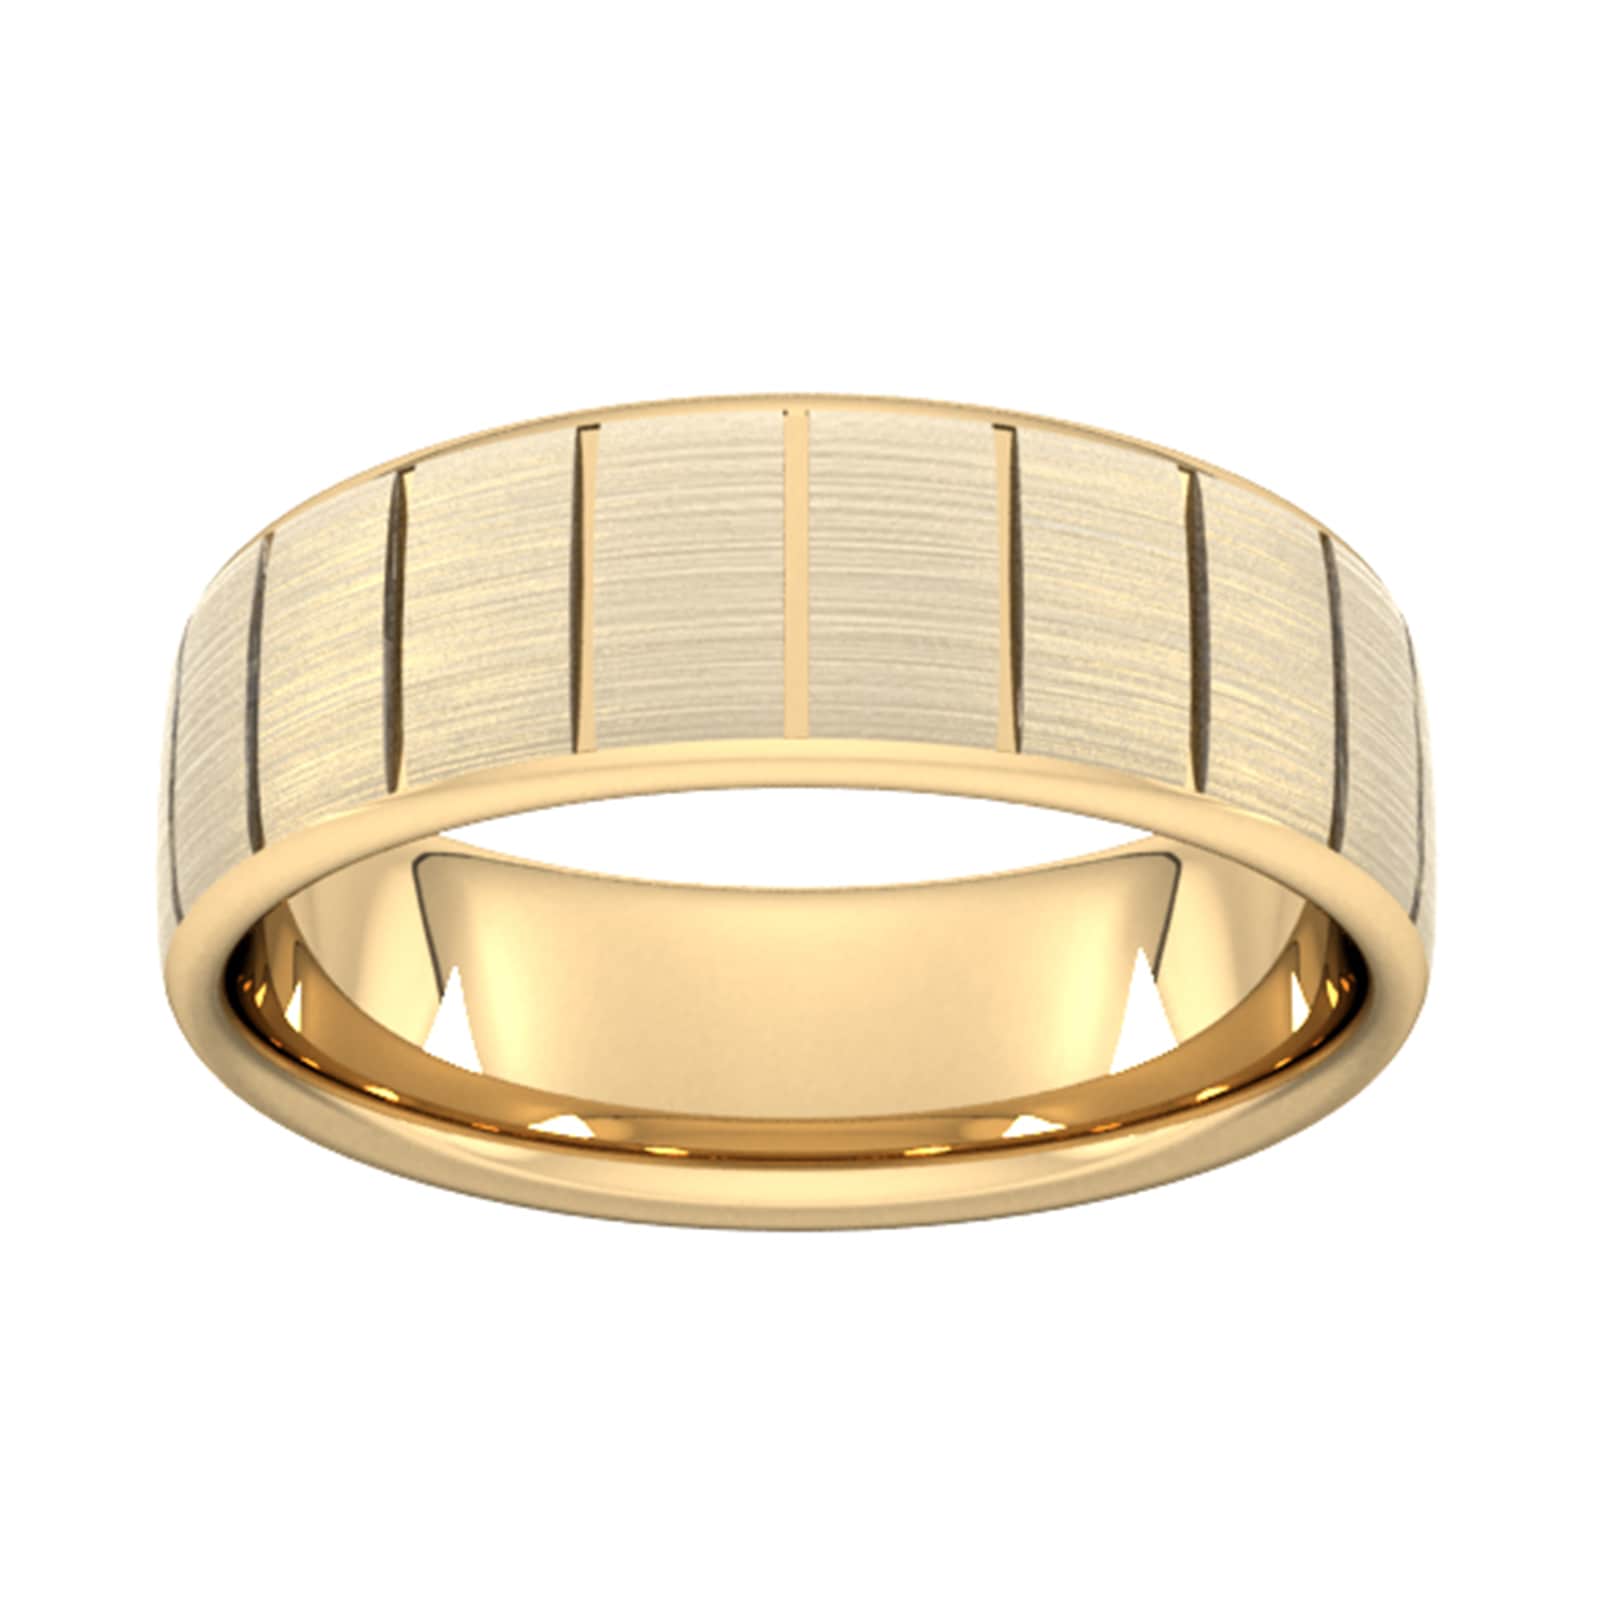 8mm Flat Court Heavy Vertical Lines Wedding Ring In 18 Carat Yellow Gold - Ring Size U